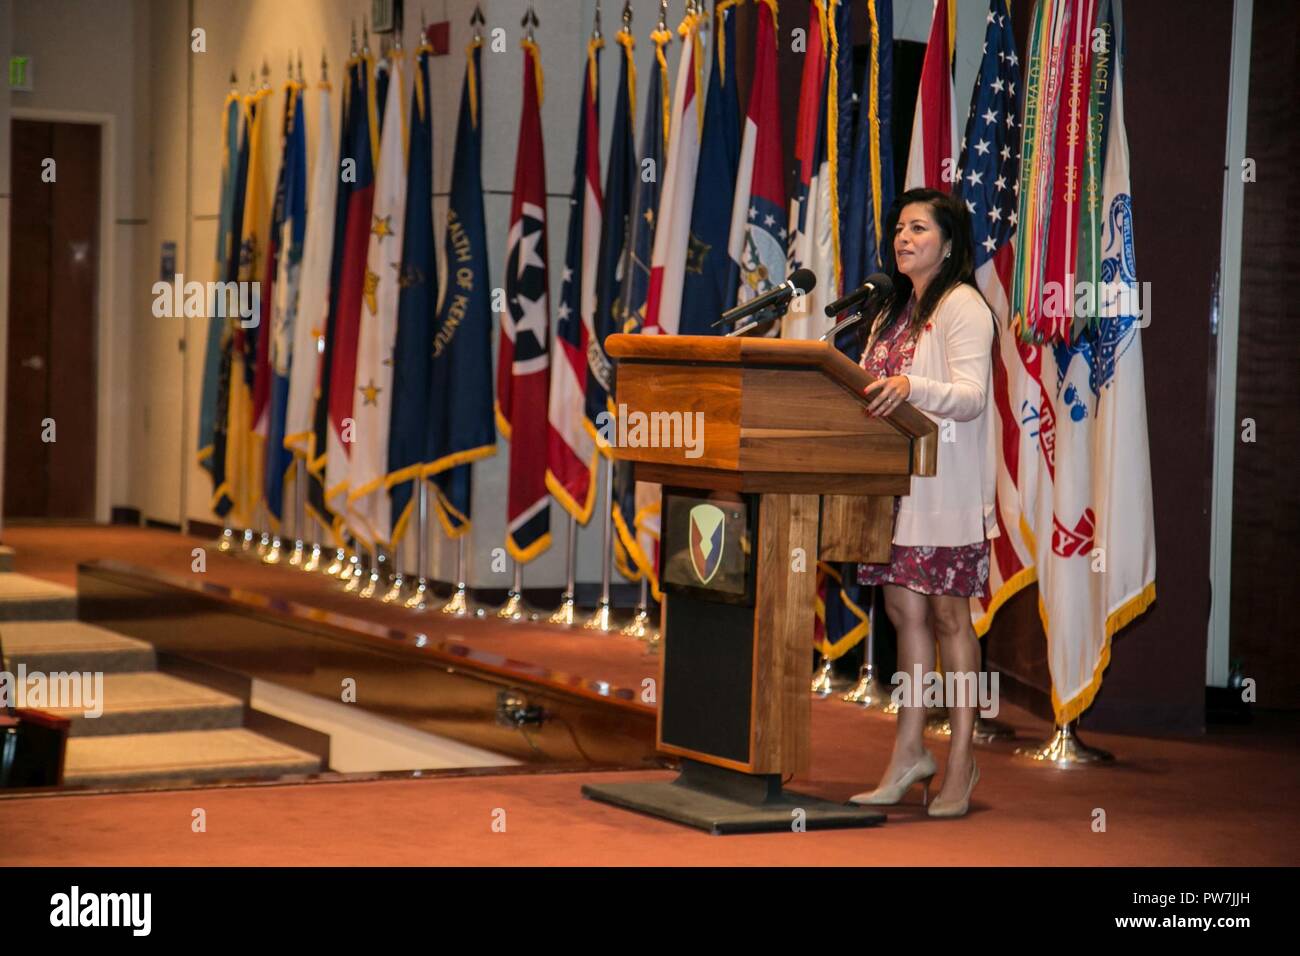 Christine Chavez gives her remarks as the keynote speaker during the Hispanic-American Heritage Month Observance Sept. 25, 2017 at Redstone Arsenal, Alabama.  Chavez is the granddaughter of labor leader and civil rights activist Cesar Chavez. Stock Photo